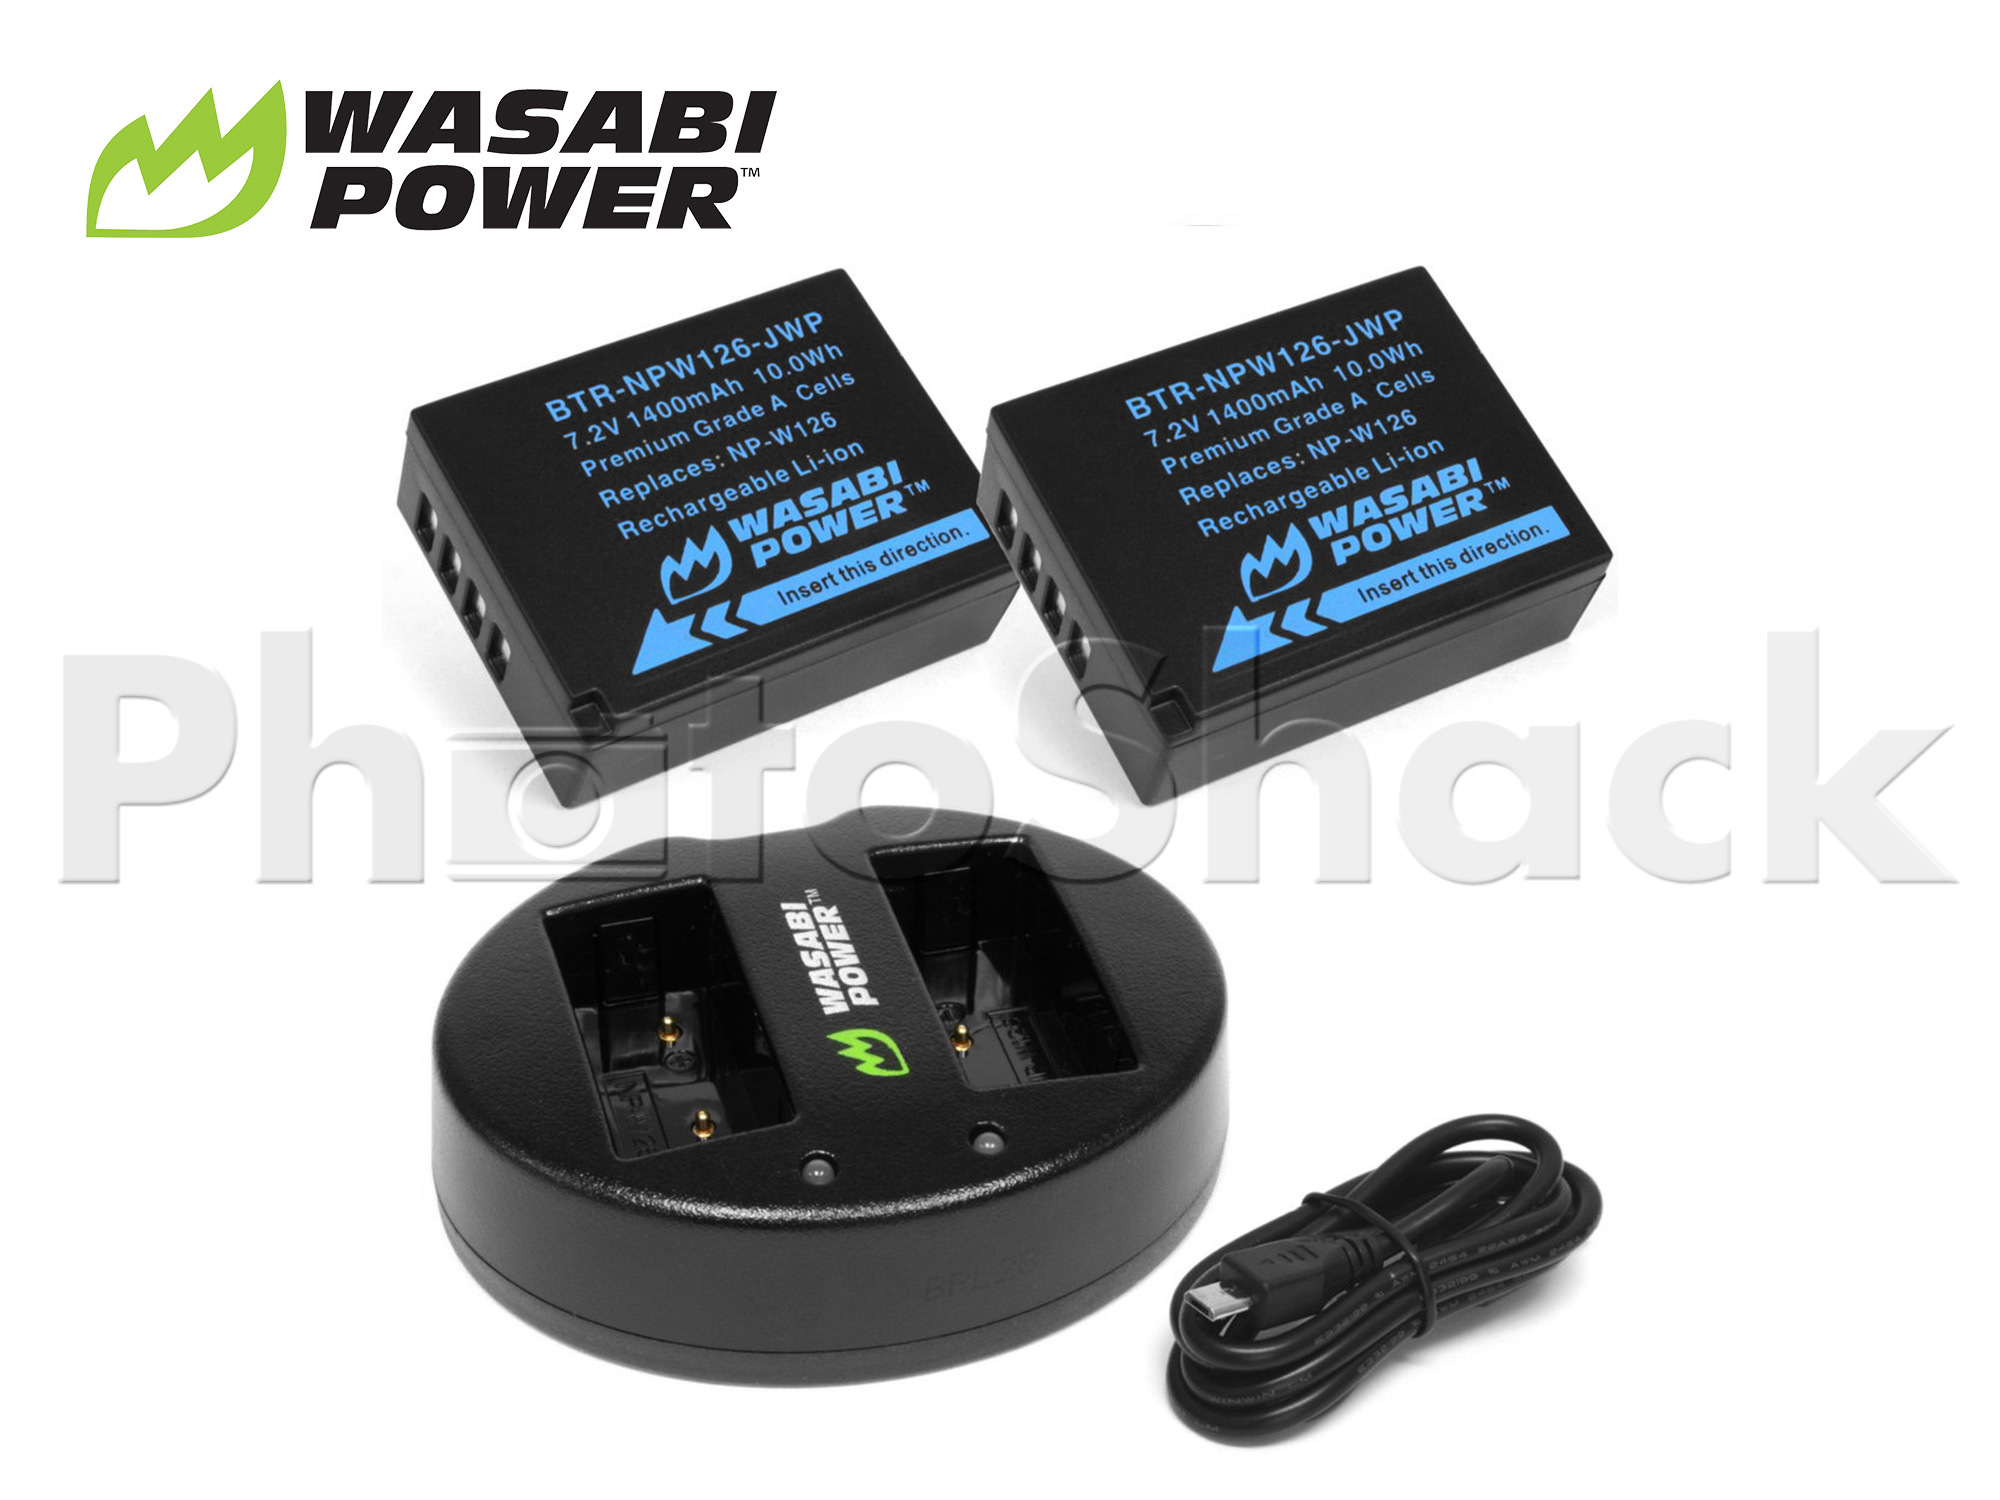 NPW126 Battery for Fujifilm (2 Pack + Dual Charger) - Wasabi Power 